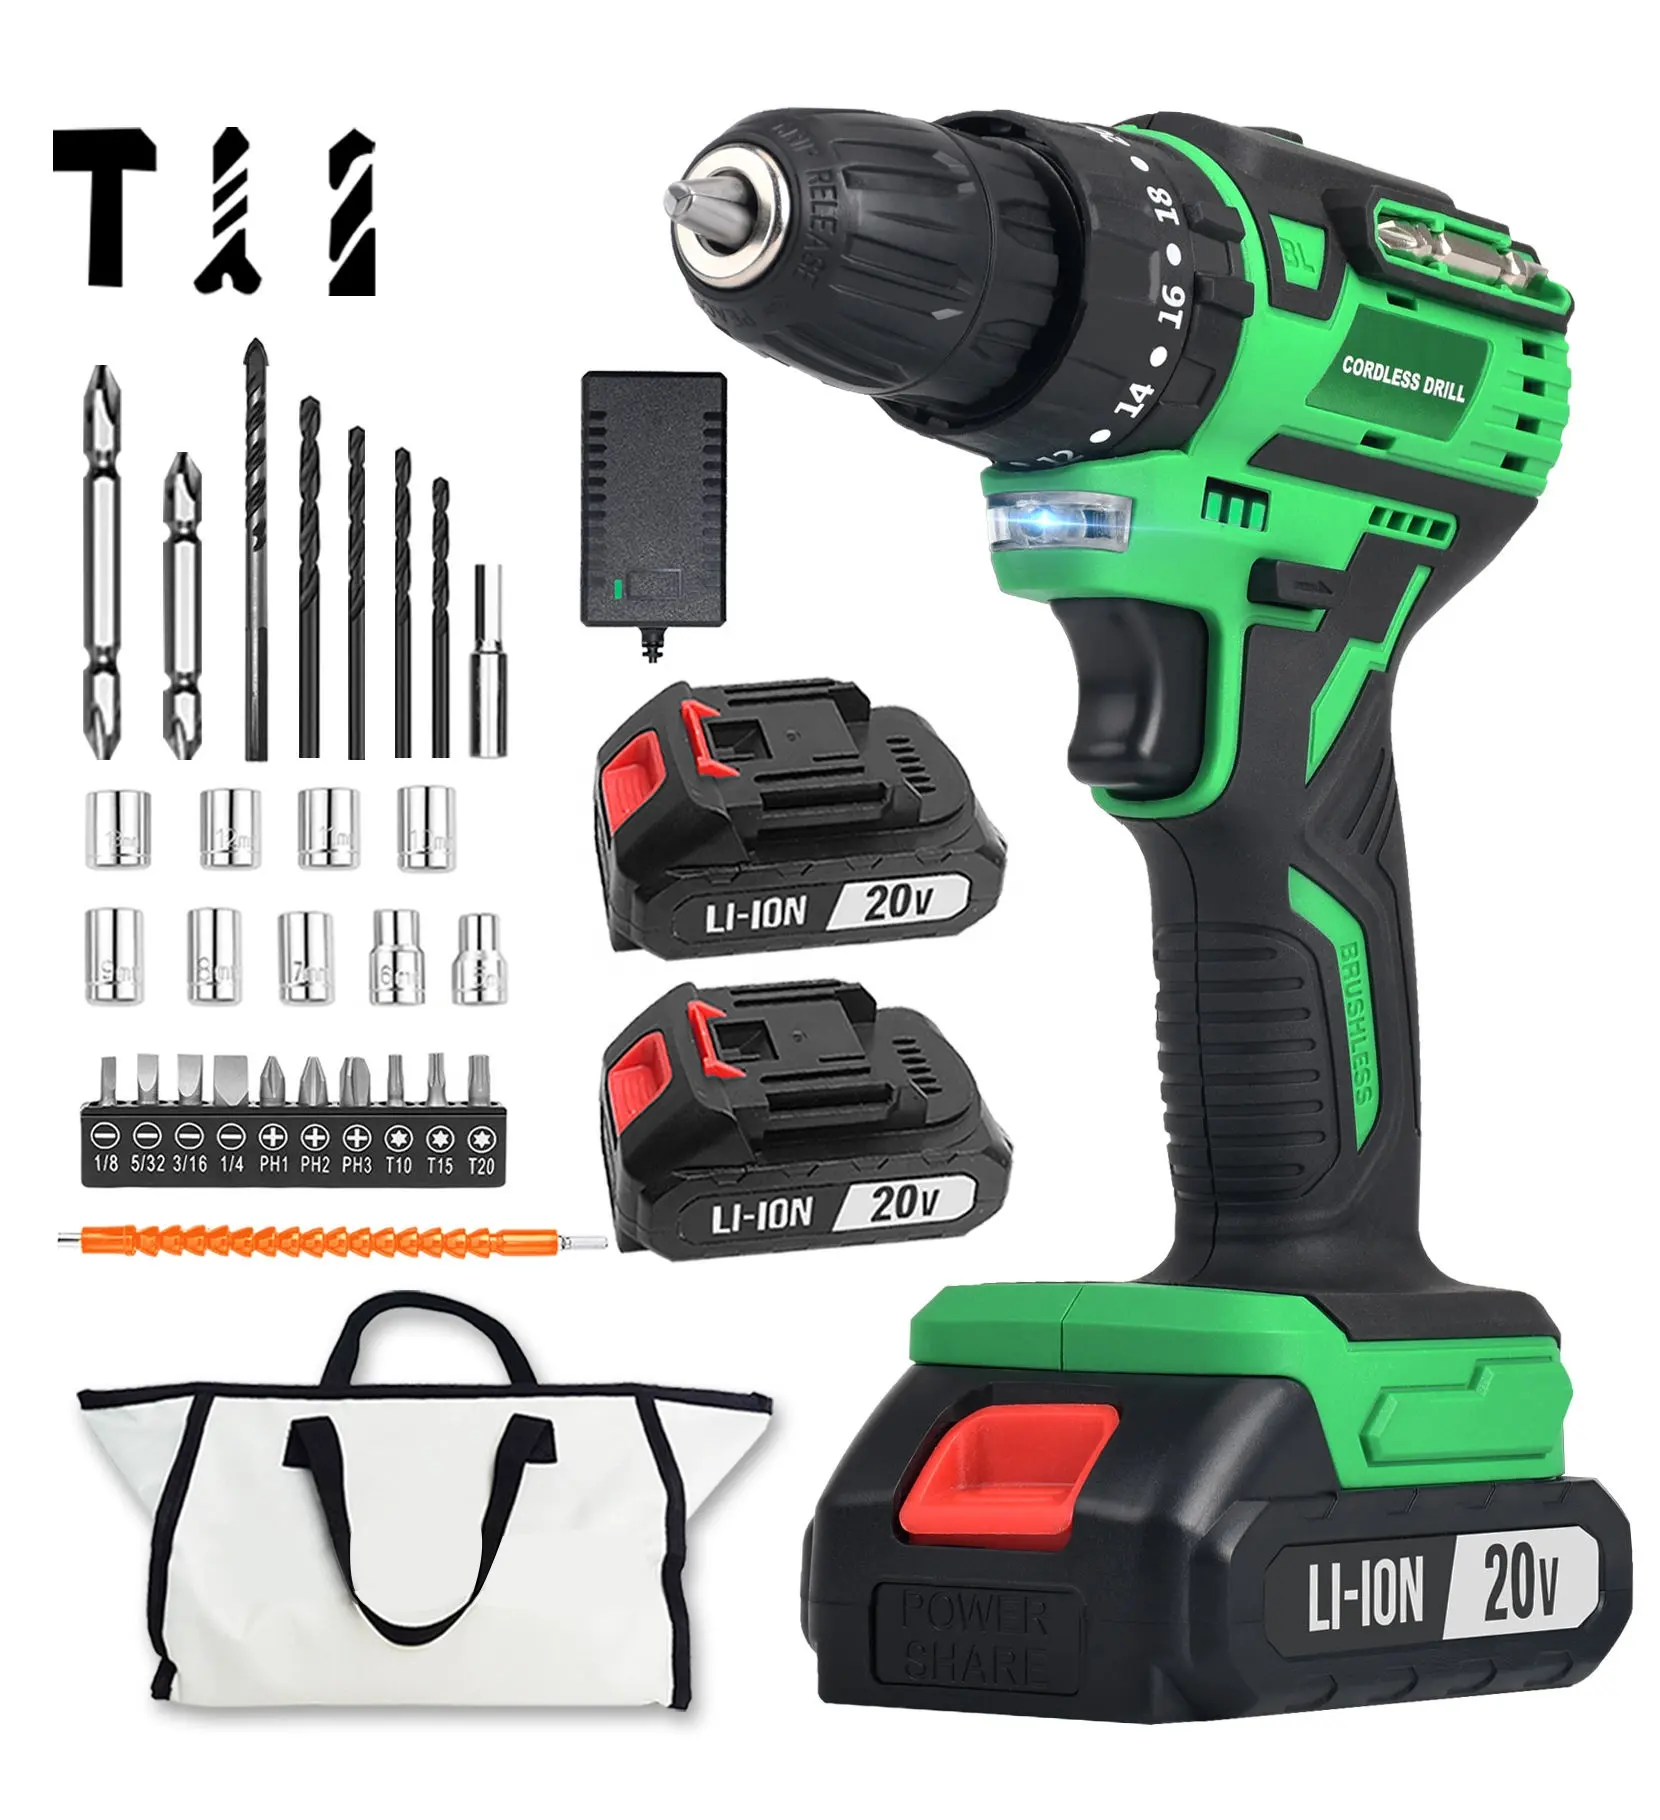 Brand OEM 20V Power Drills 13mm Brushless Motor Drilling Machine With Battery Cordless impact Drill Power Tool Set